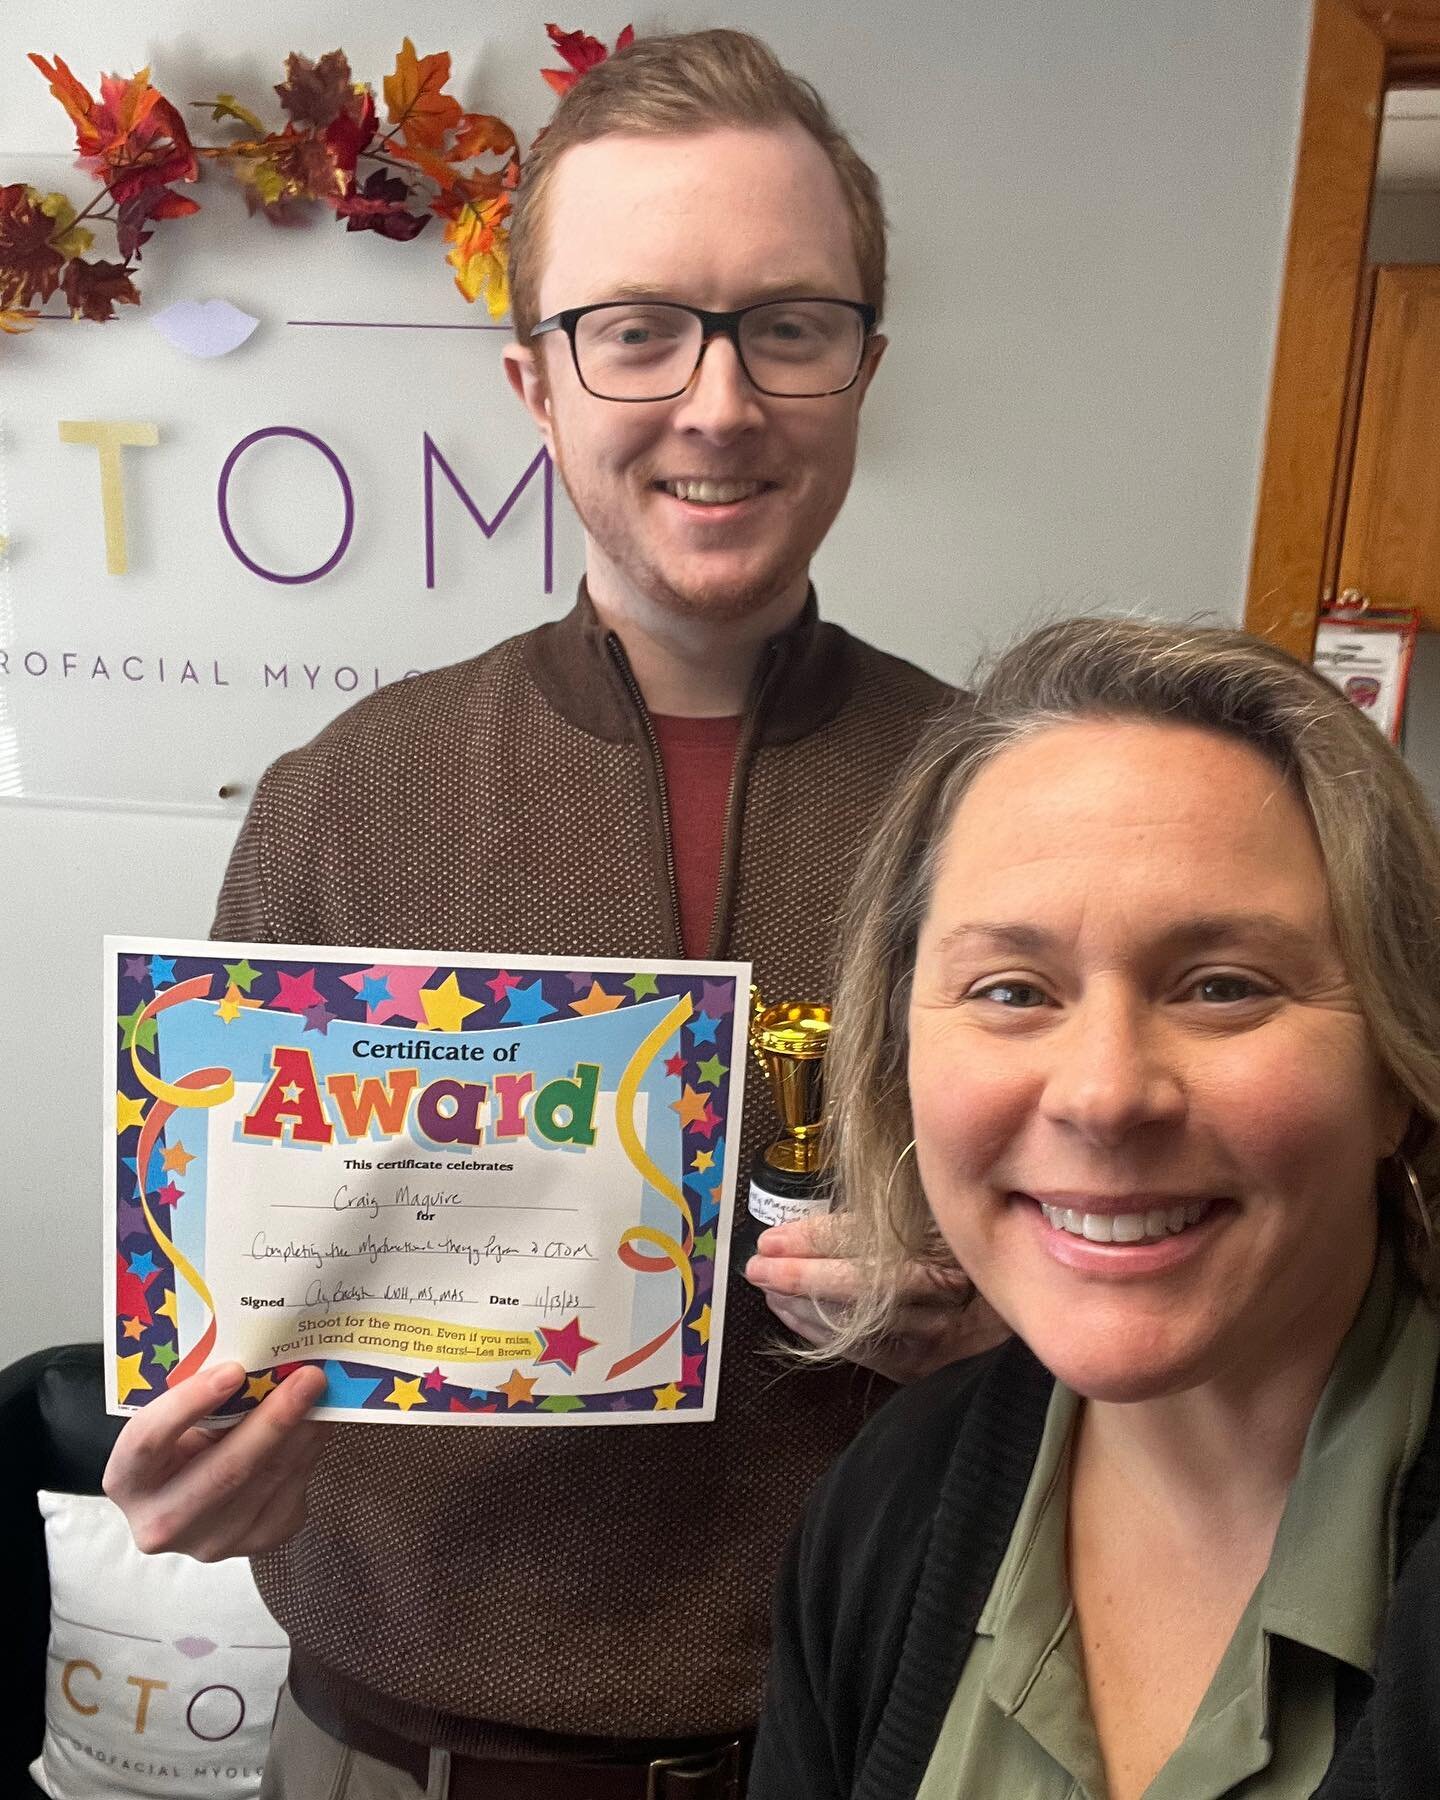 We are so proud of our CTOM grad 👨&zwj;🎓

Never too old for a trophy 😉 

#ctorofacialmyology #orofacialmyology #ctom #orofacialmyofunctionaltherapy #myofunctionaltherapy #crunchmama #tonguetherapy #tonguethrust #wellness #mouthbreathing #happykids